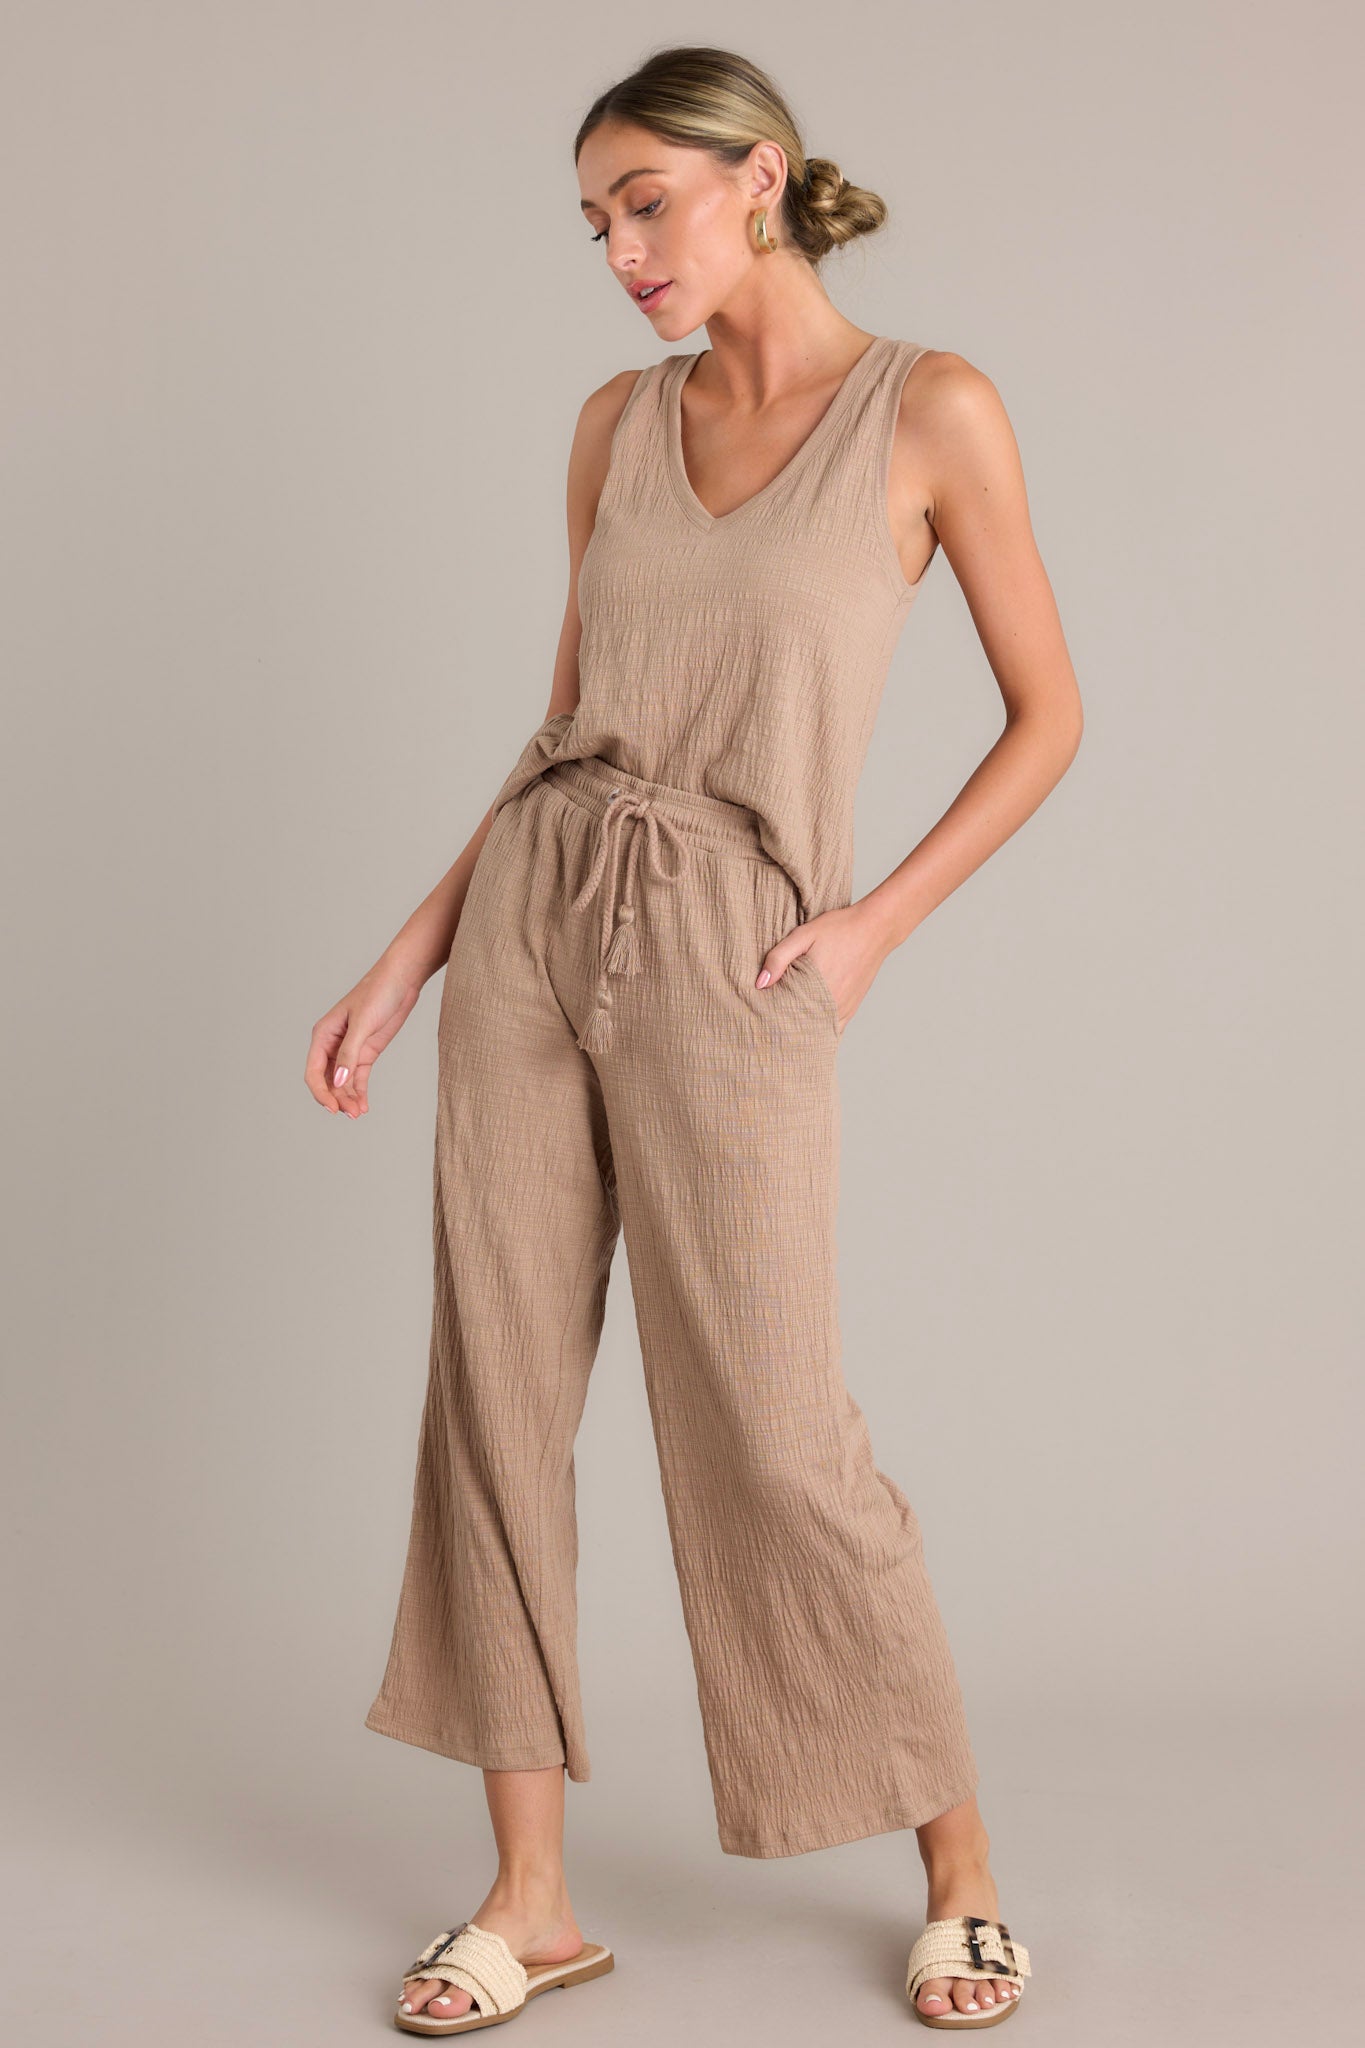 Front angled view of high-waisted beige pants featuring an elastic waistband, self-tie drawstring, functional hip pockets, textured material, and wide legs